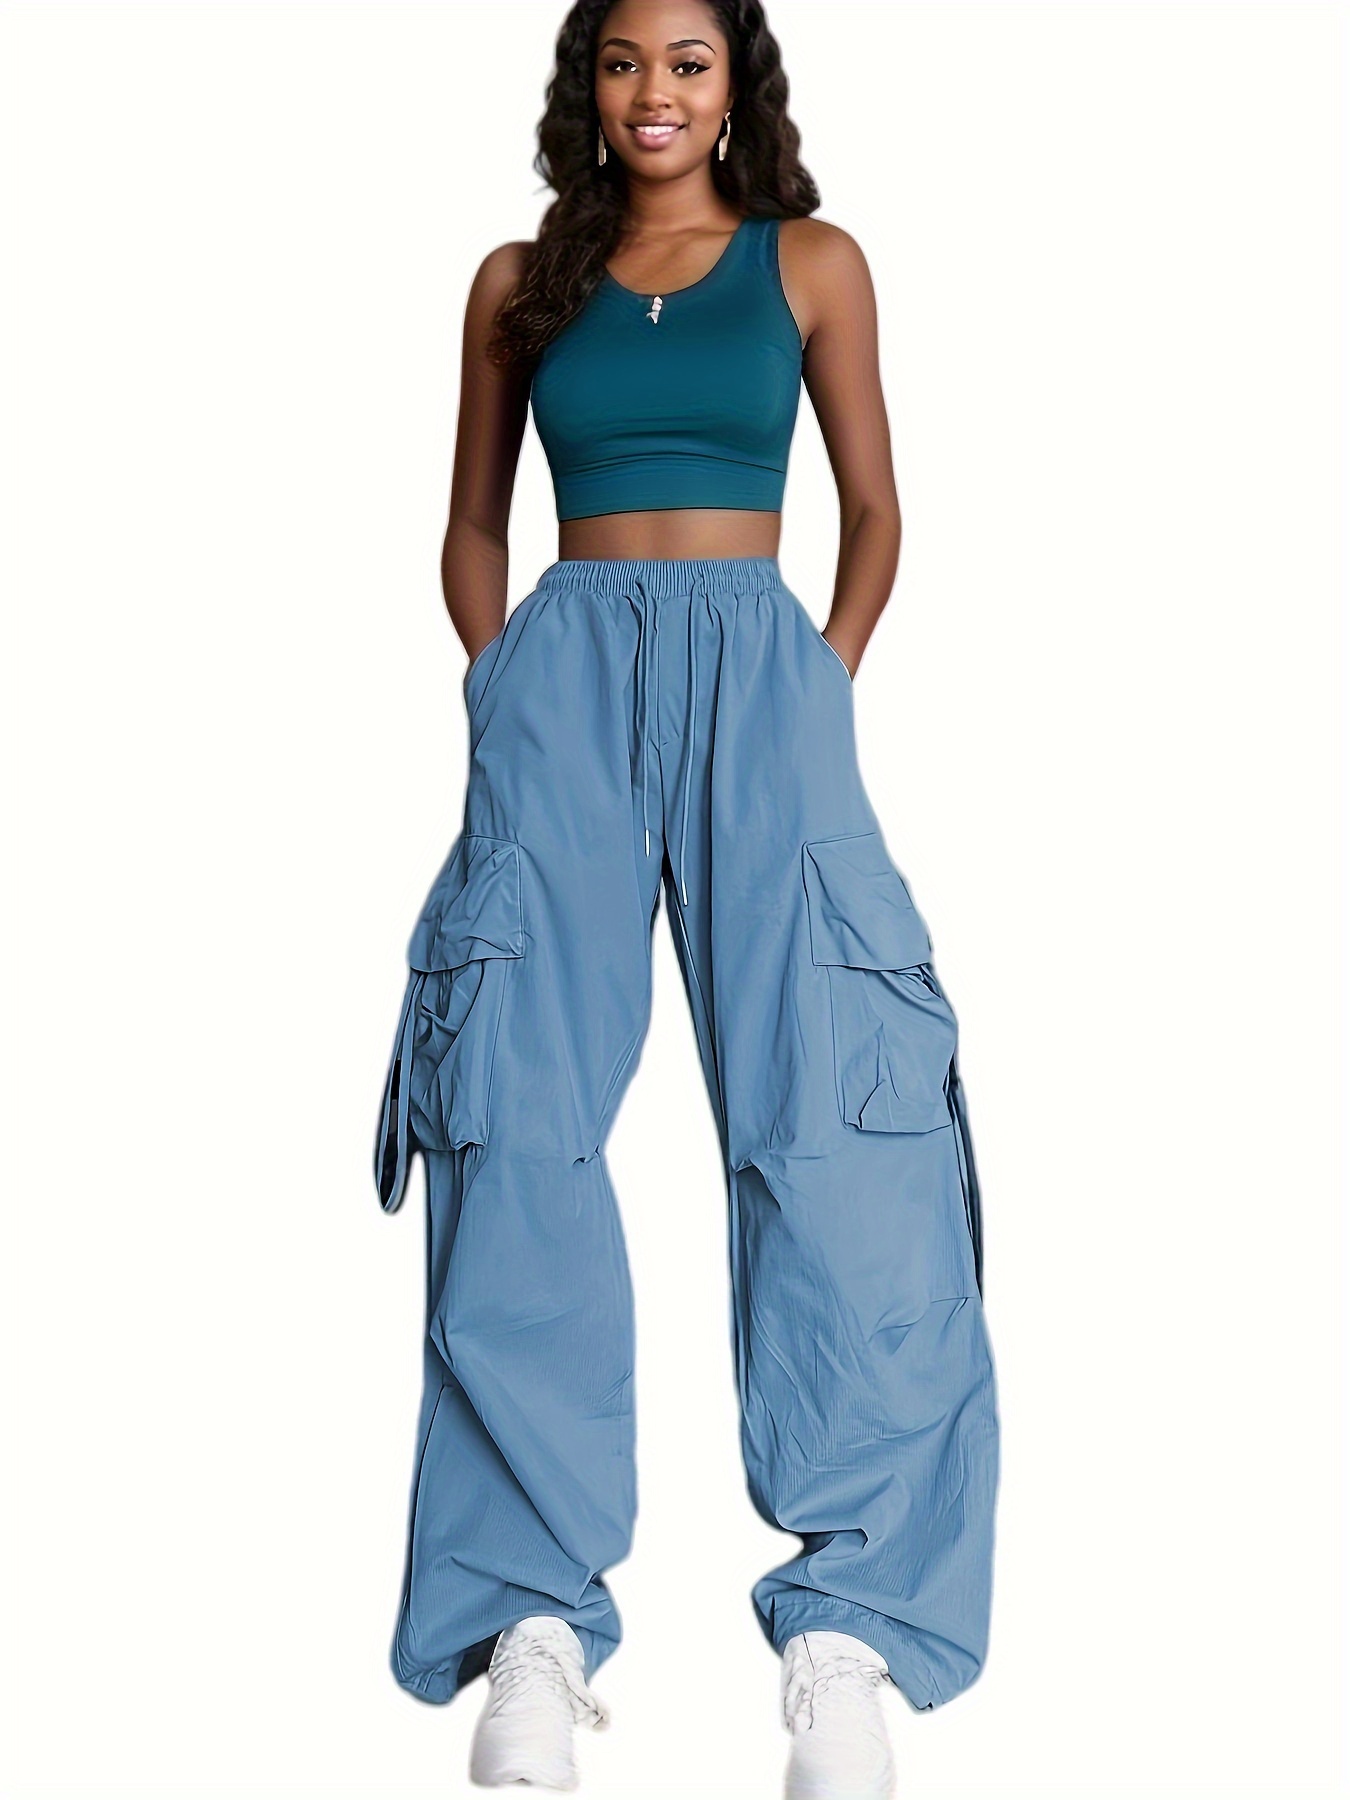 Casual Elastic Waist Drawstring Side Pockets Pants For Women at Rs 429, Surat